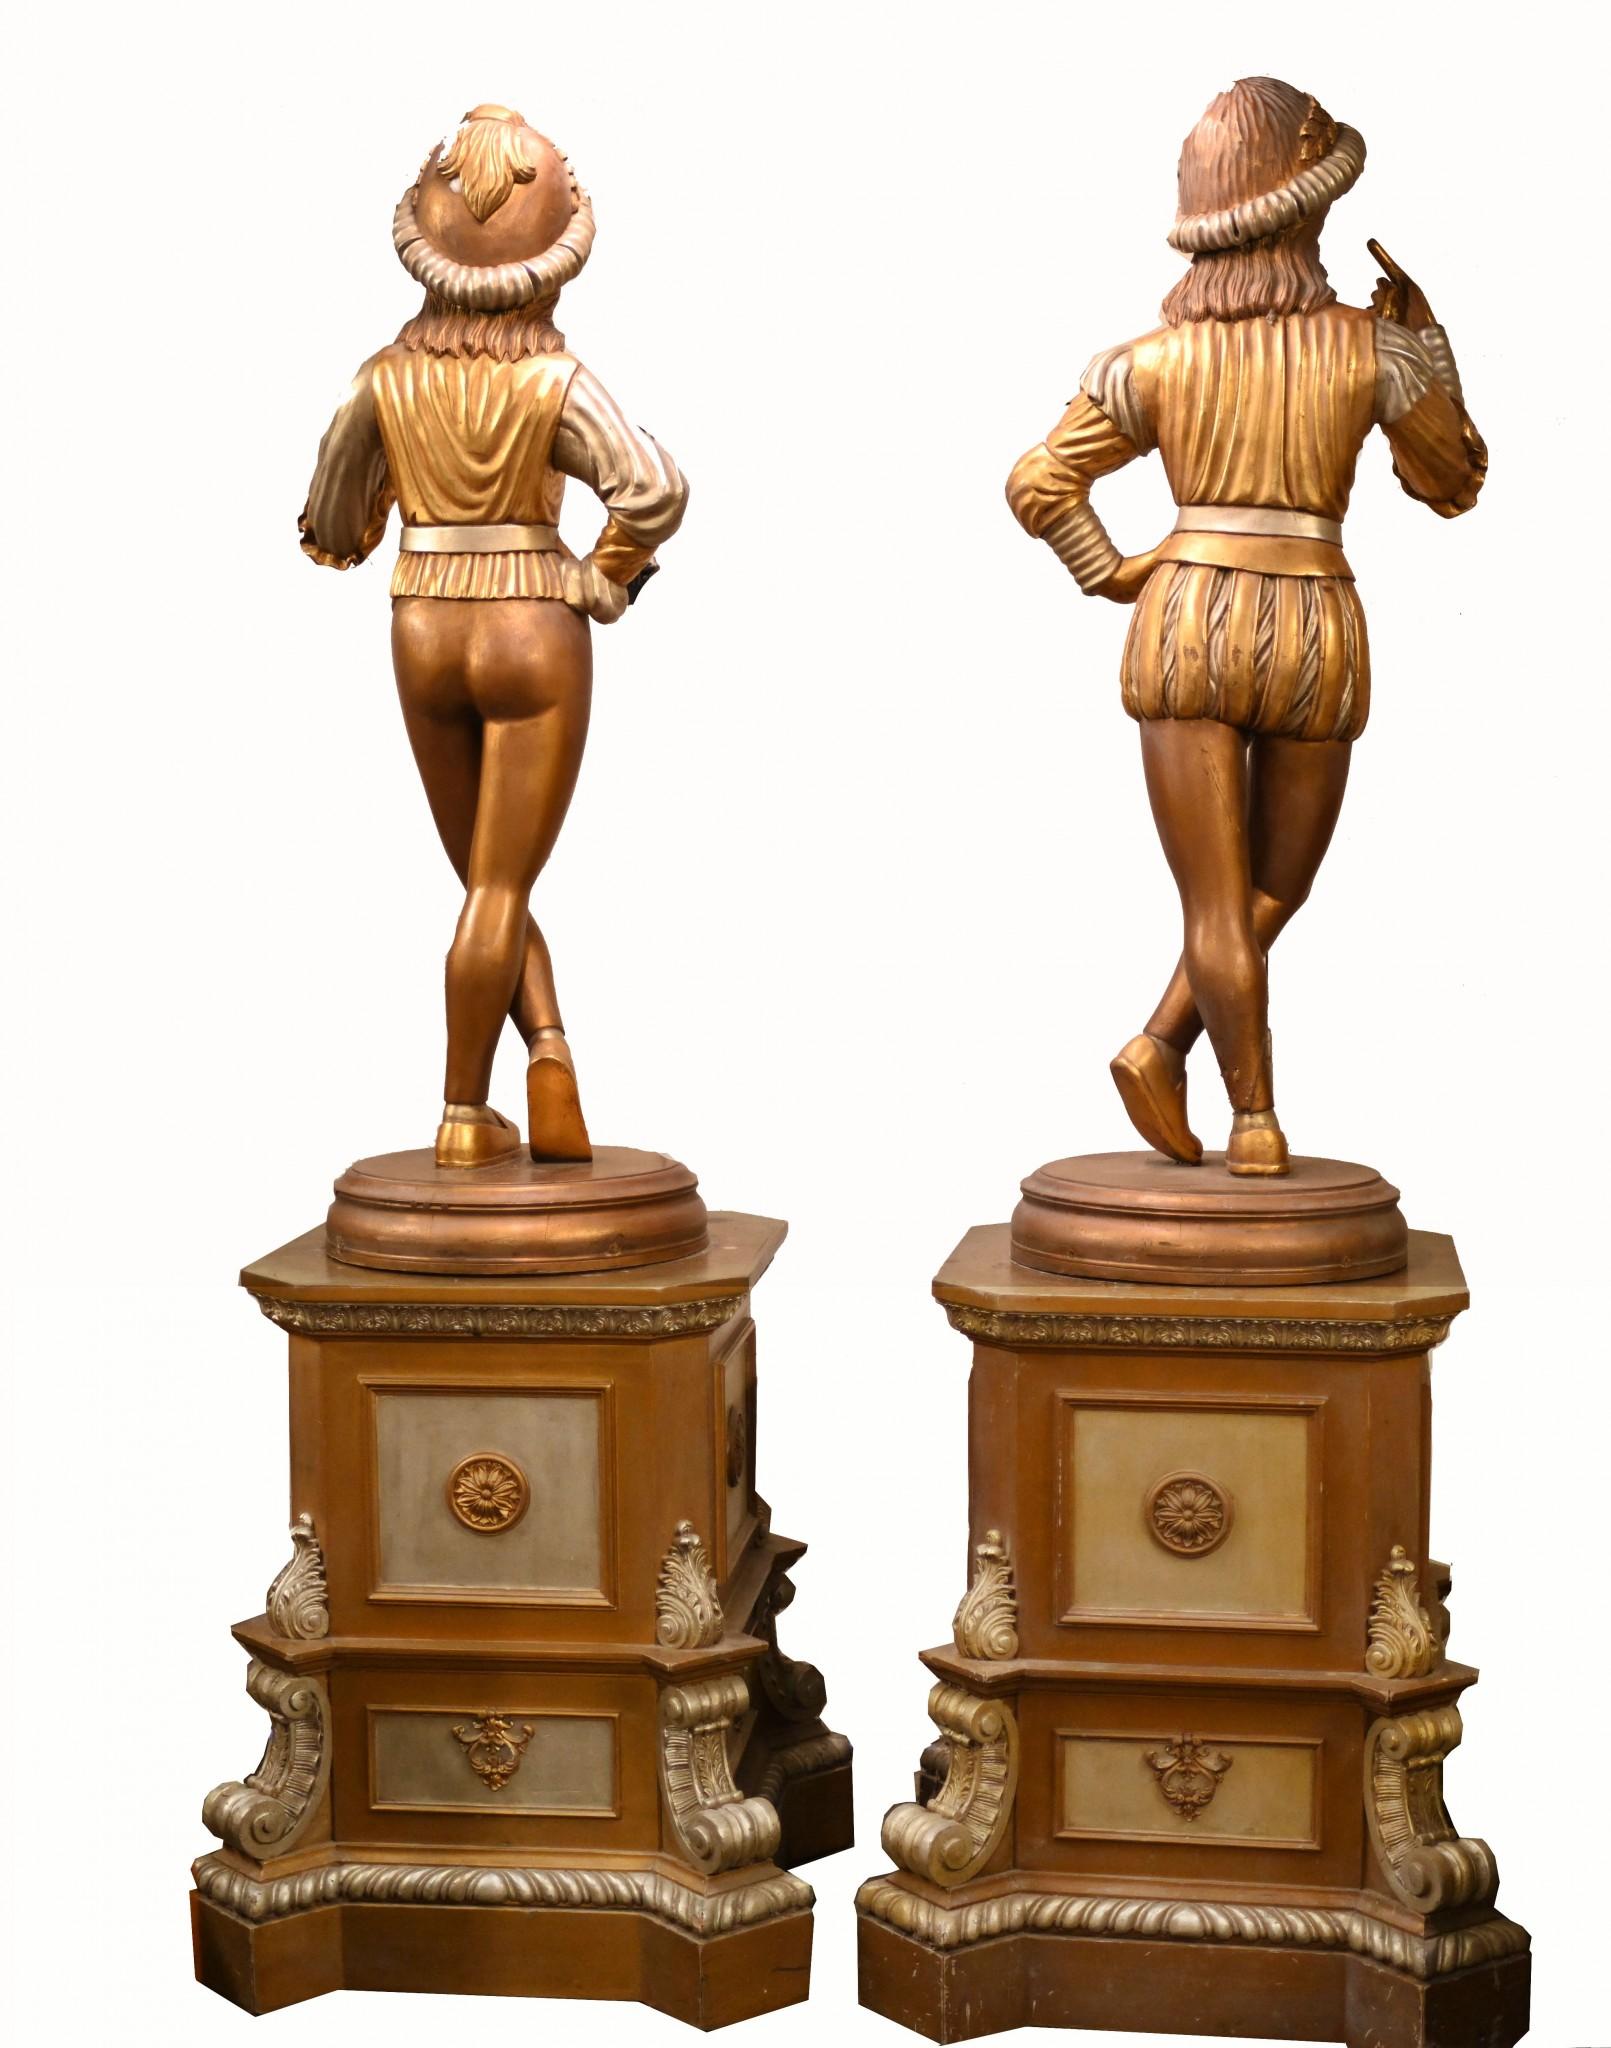 Amazing and unique pair of very large Italian Renaissance page boy statues
Of an architectural quality in the right space or setting these really would be a talking point statement pair
Stand on the classical square pedestal bases
Polychrome painted